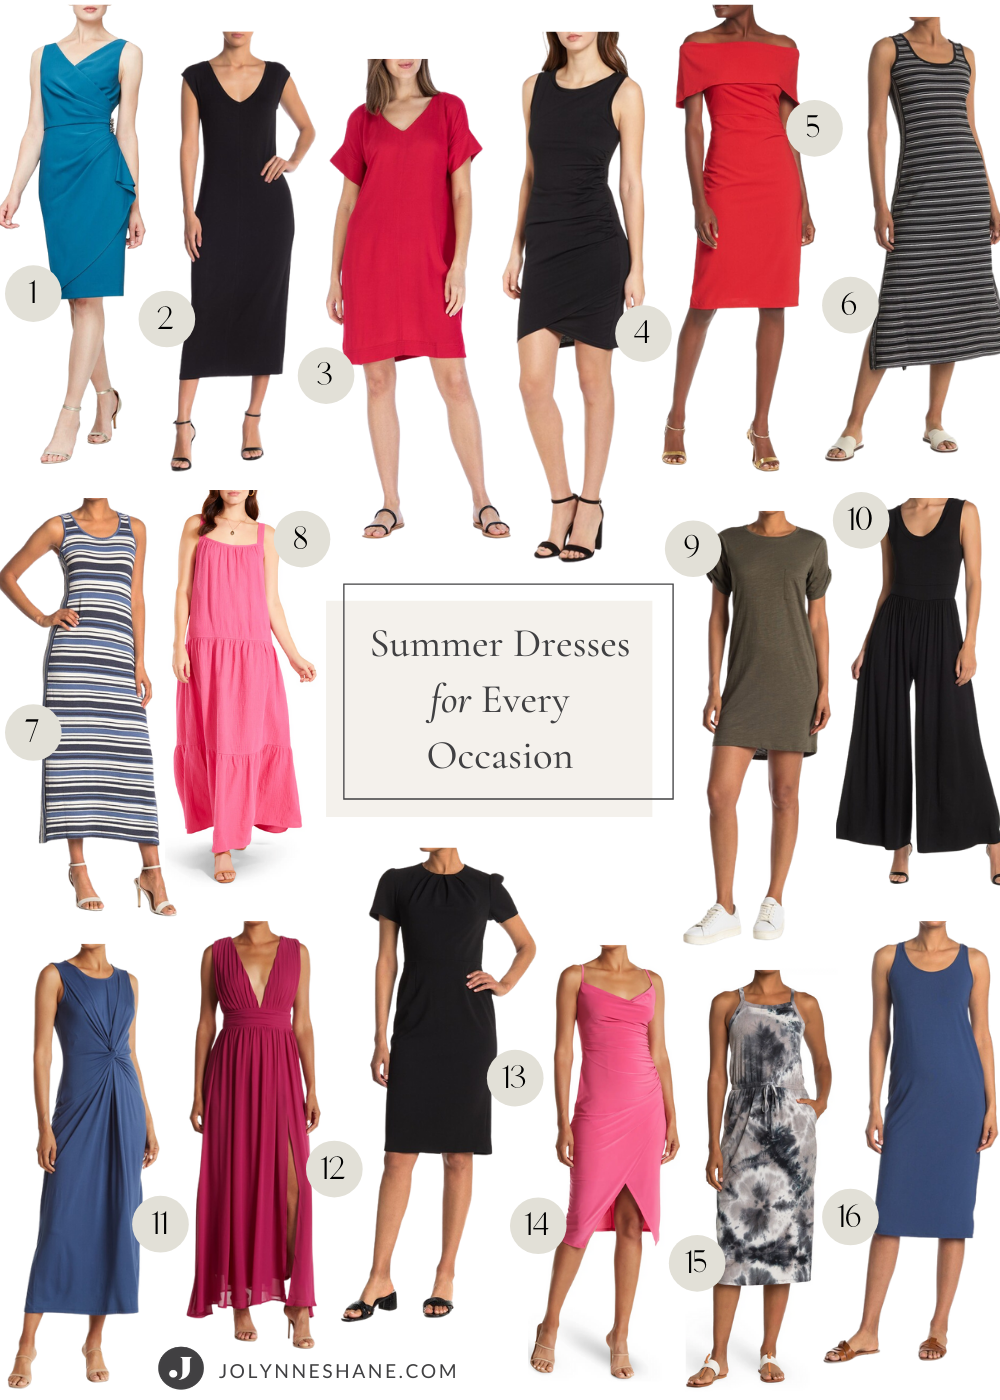 Summer Dresses for Every Occasion